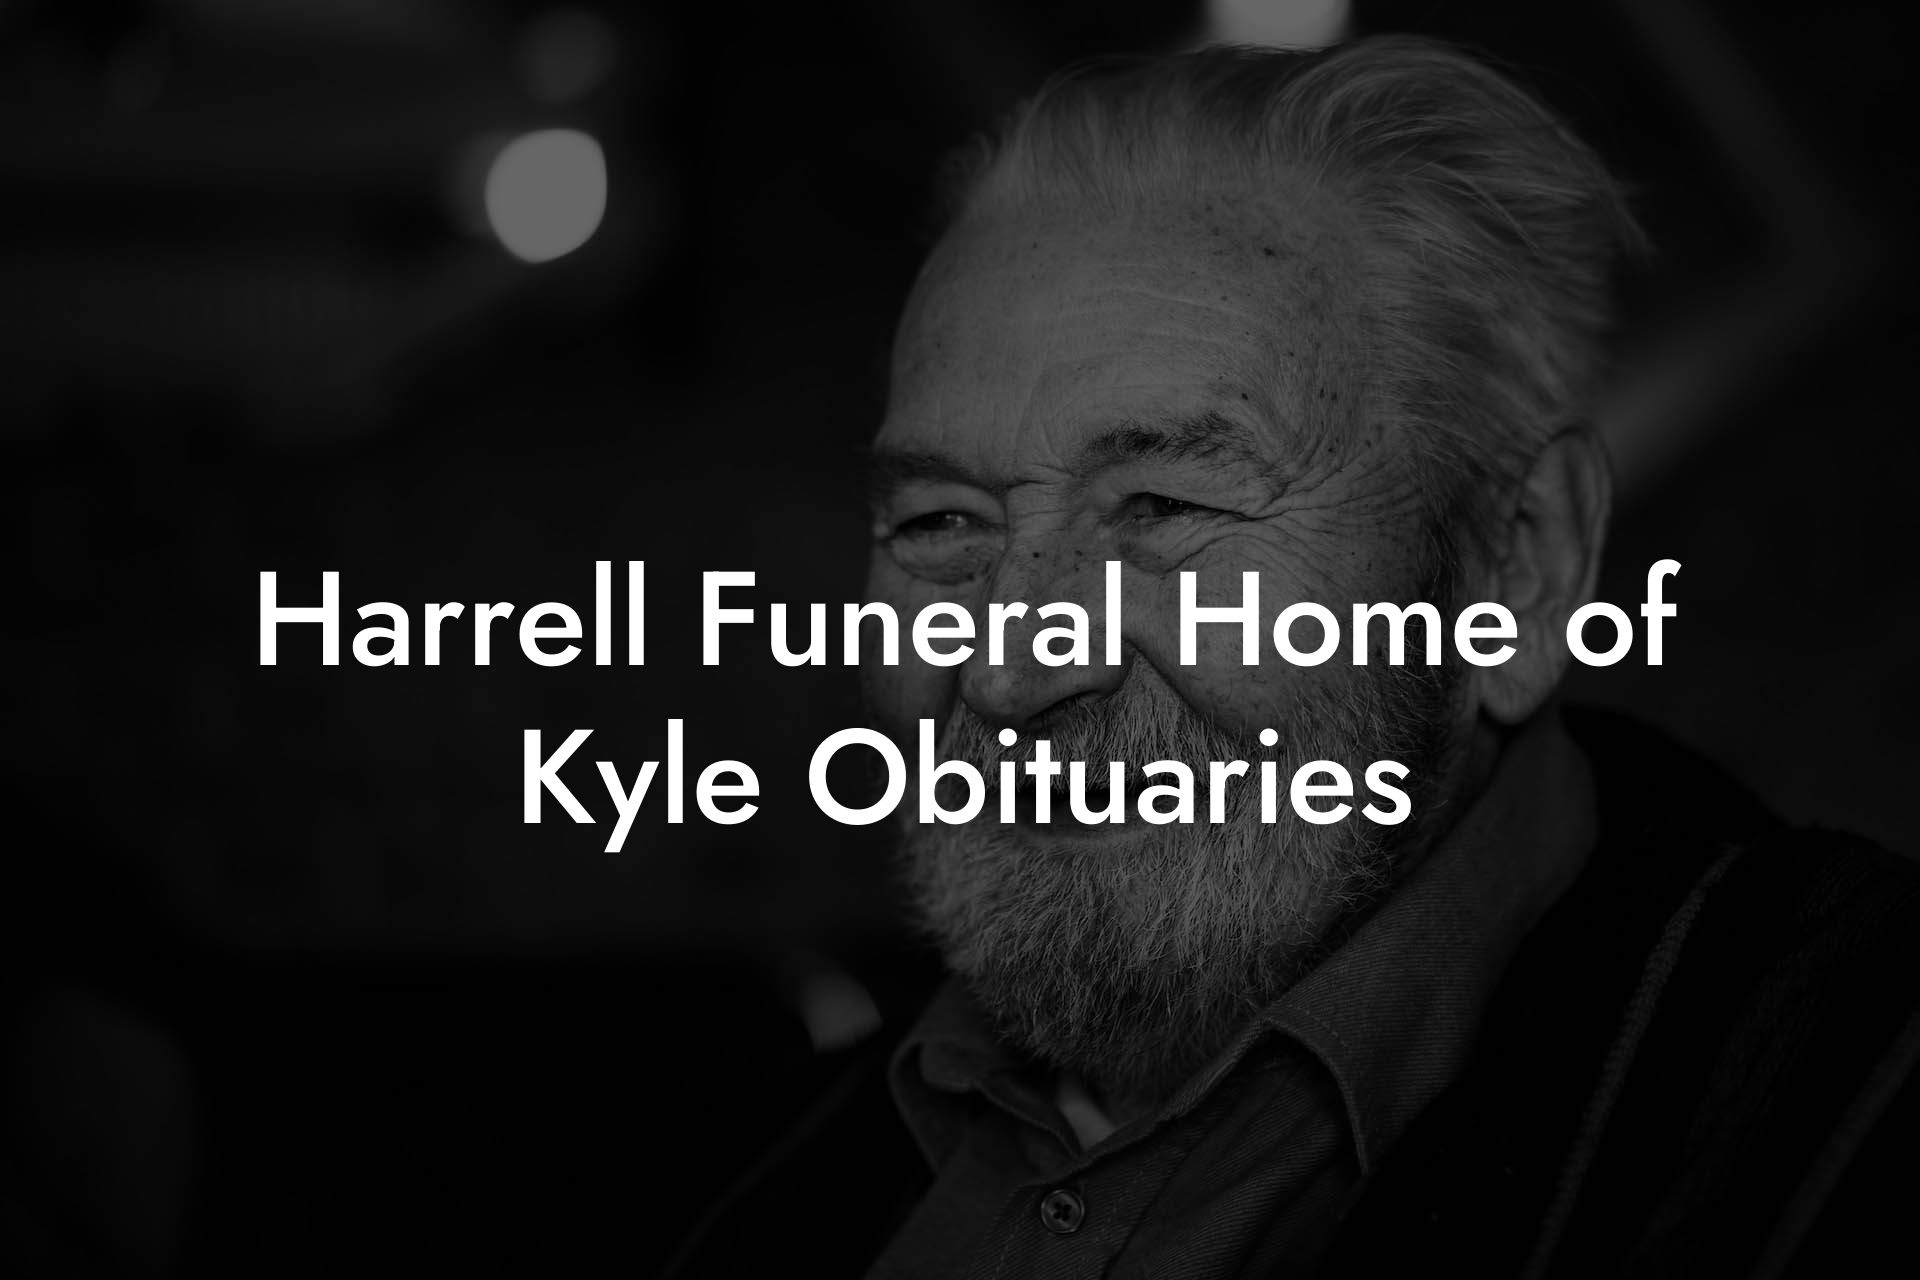 Harrell Funeral Home of Kyle Obituaries